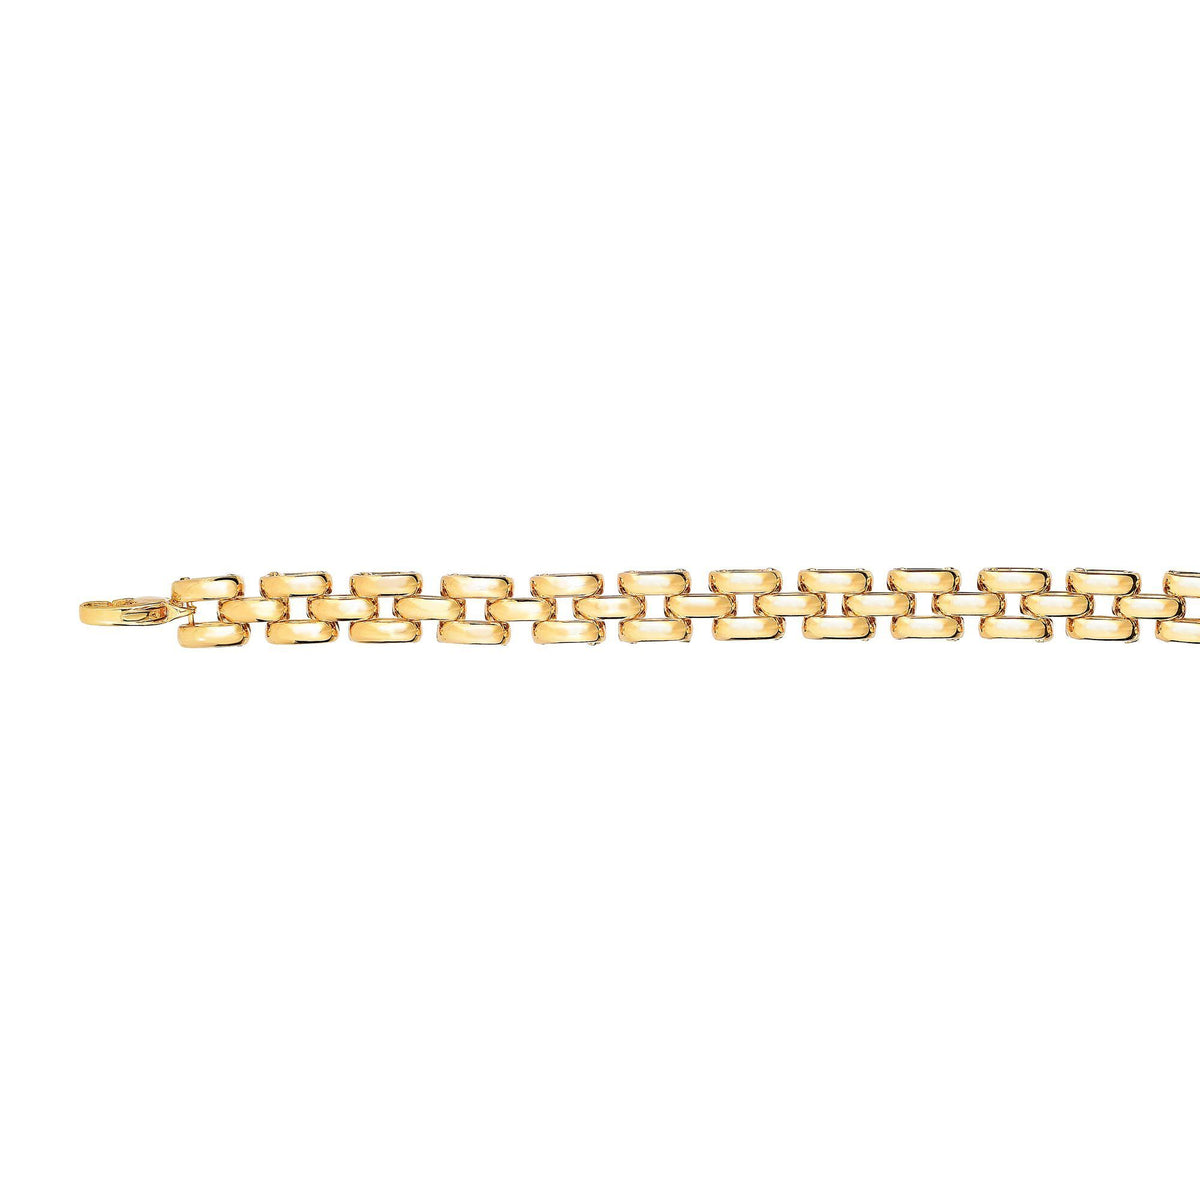 14k Yellow Gold 3 Row Panther Link Fancy Bracelet, 8" fine designer jewelry for men and women